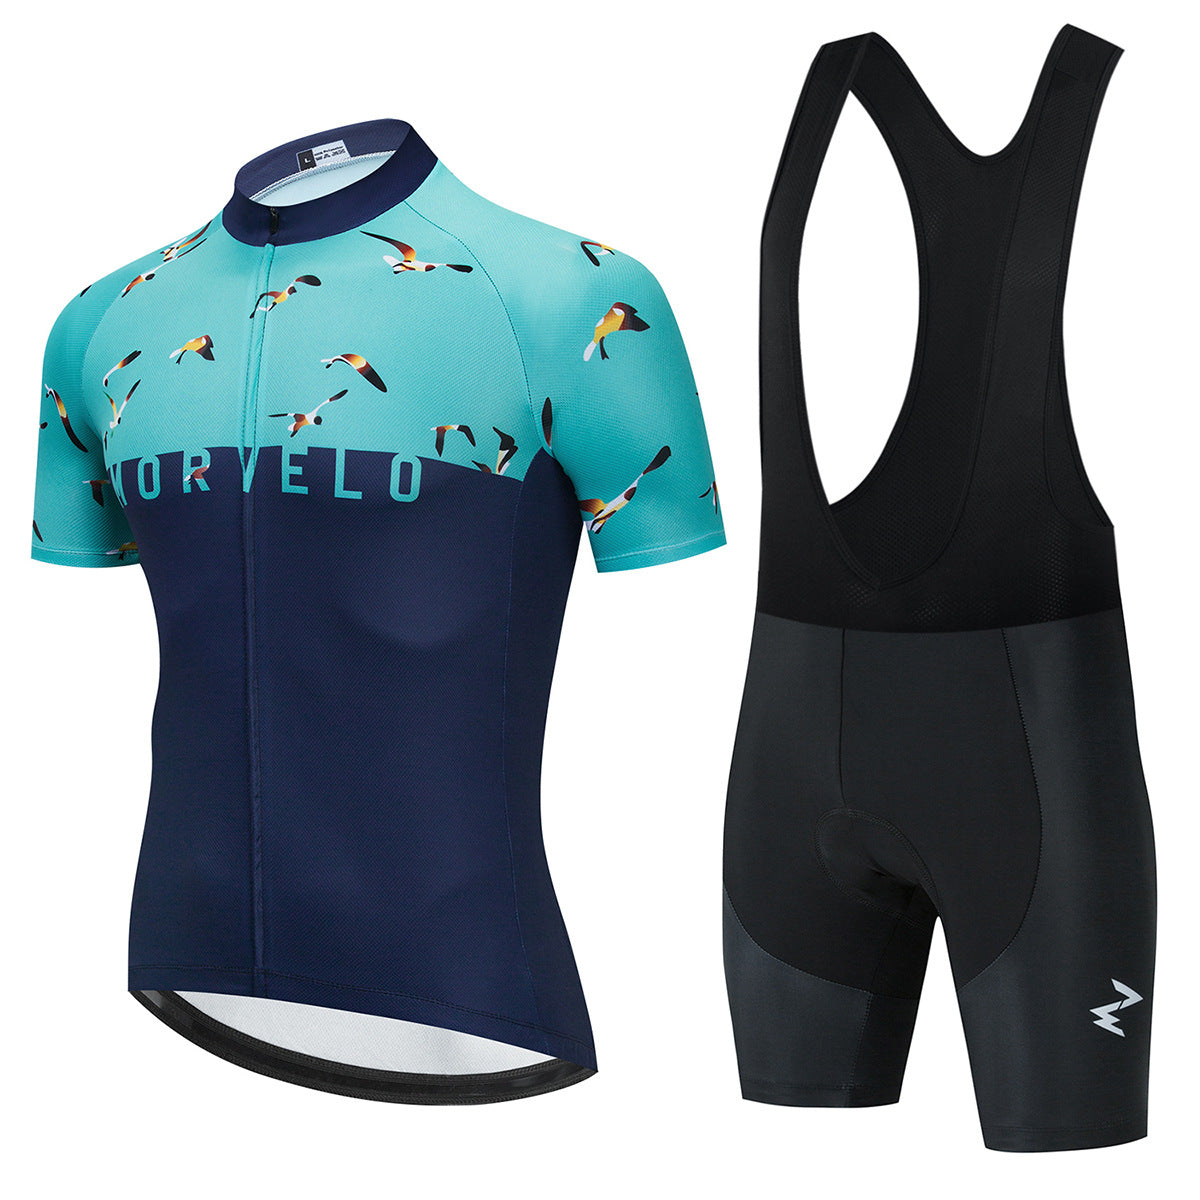 New Summer Short-Sleeved Breathable Cycling Jersey Suit - Blue Mix Bib Shorts Set / XS - Sport Finesse